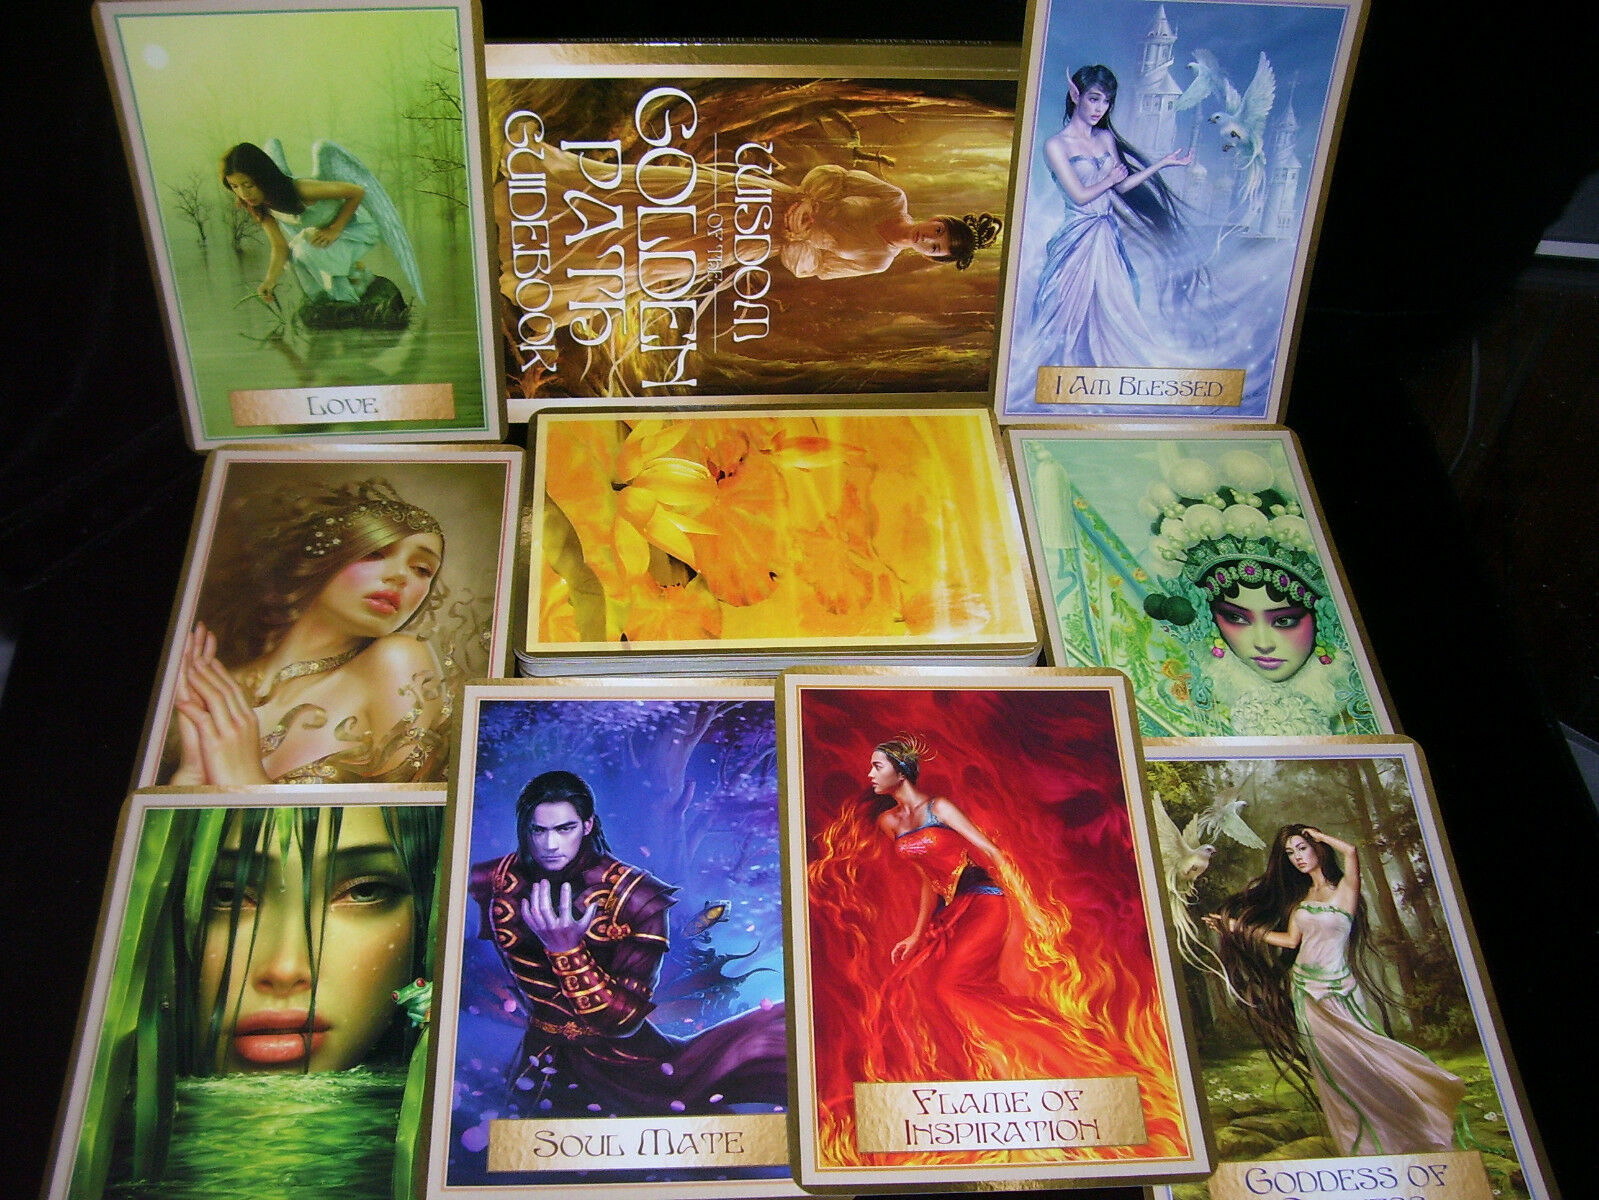 Sealed New! Wisdom Of The Golden Path Oracle Cards & Book Give Accurate Readings